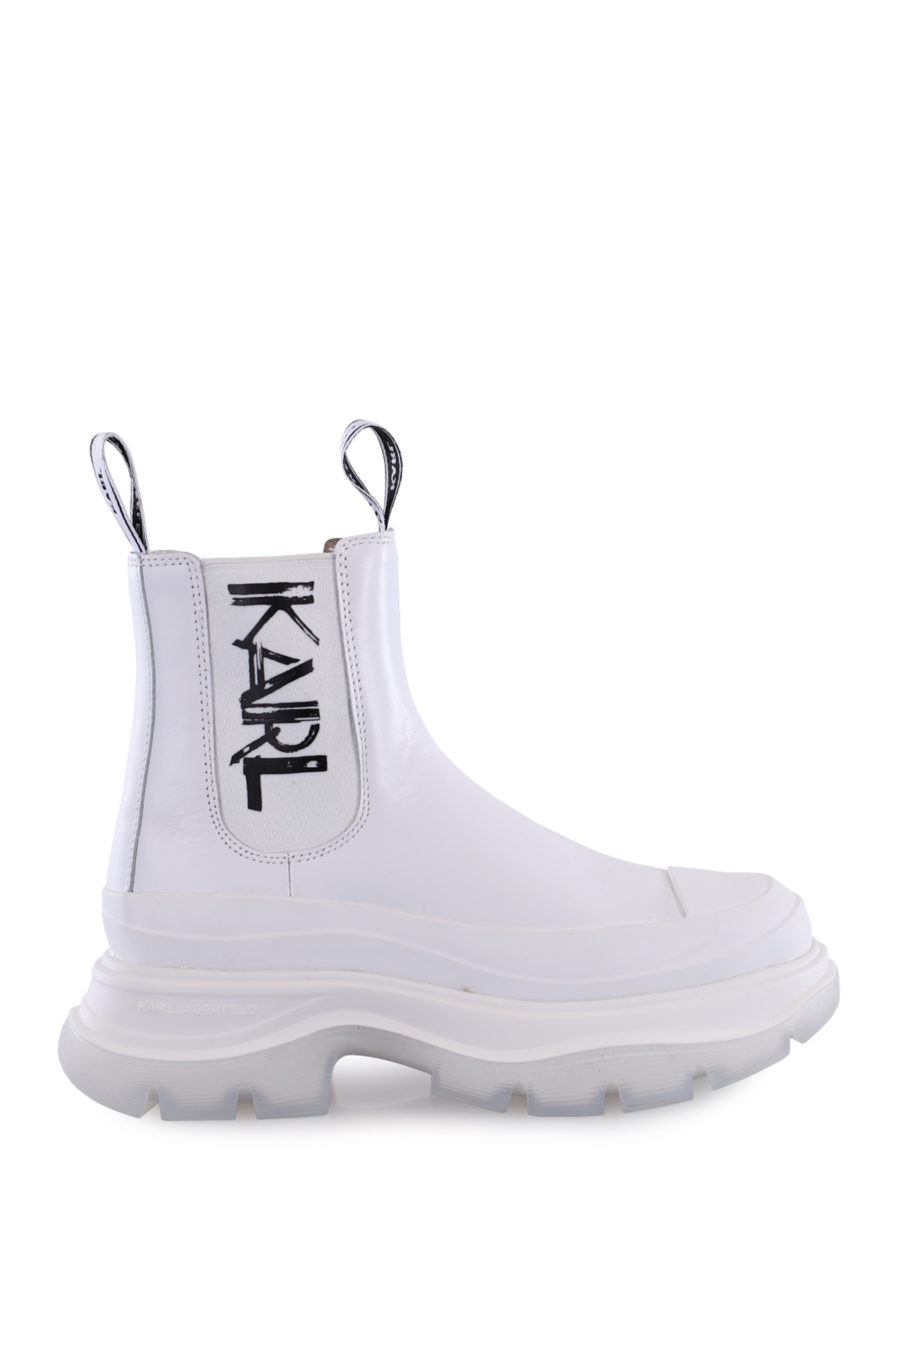 White ankle boots with platform and "art deco" logo - IMG 0187